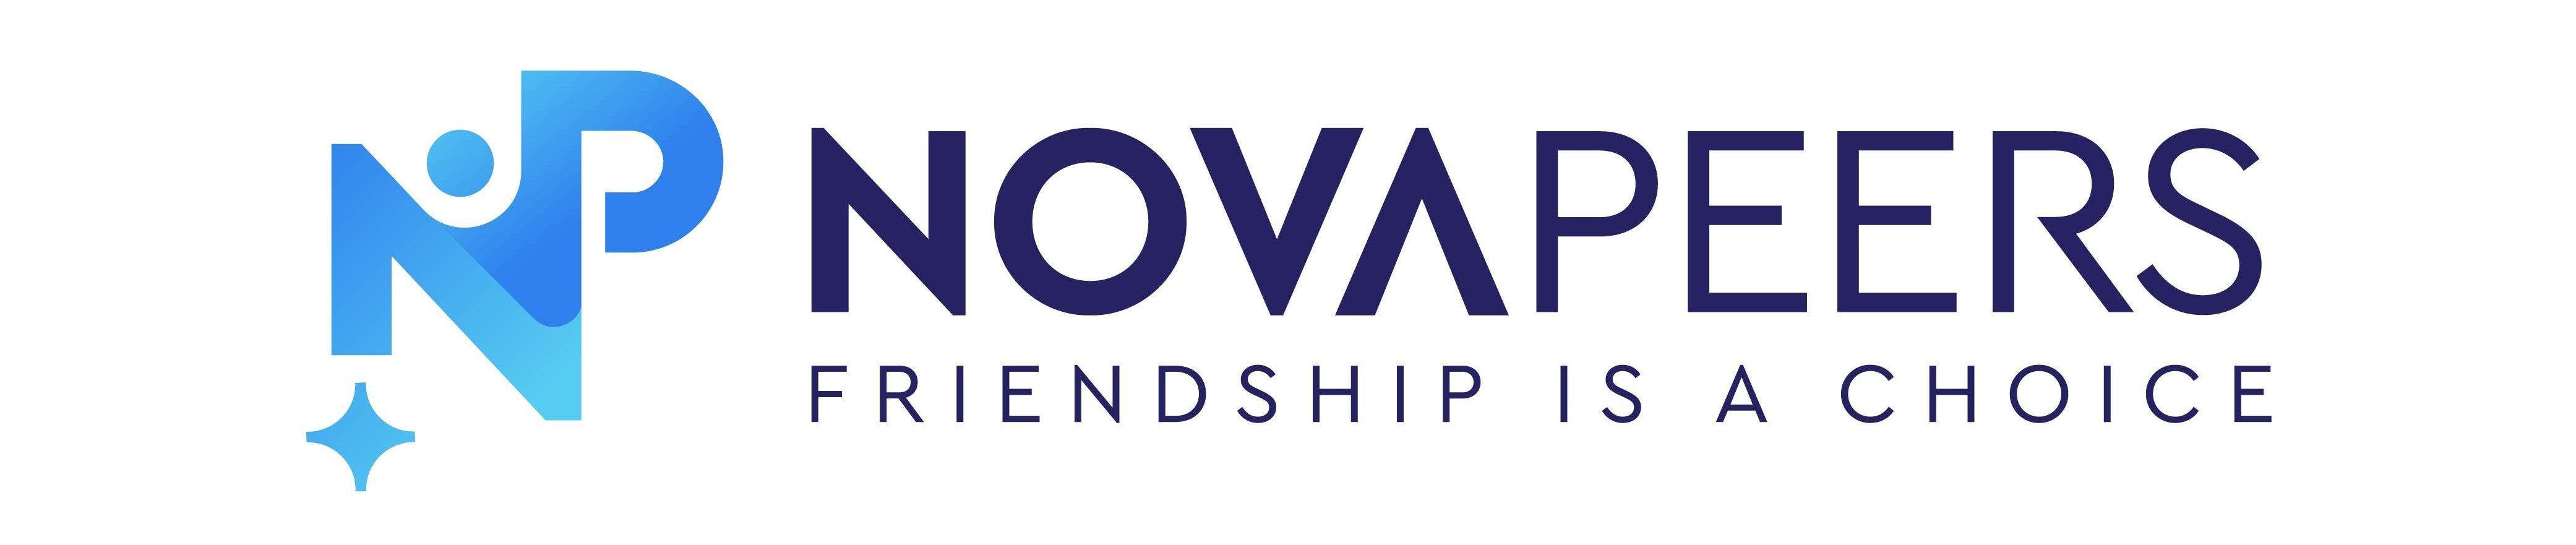 Logo for NOVA PEERS with "Friendship is a Choice"